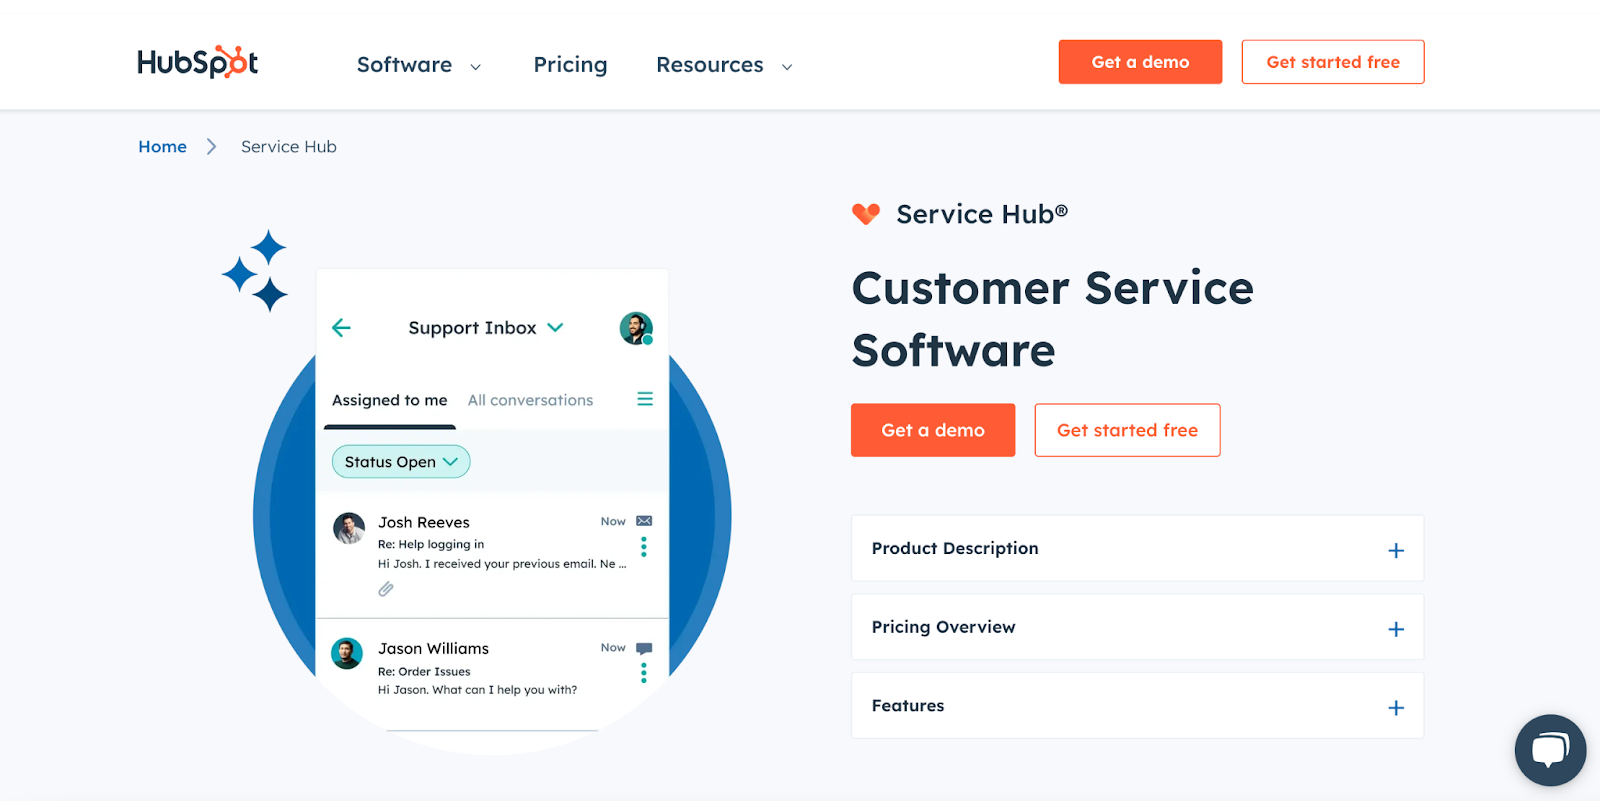 Crisis management software review for HubSpot